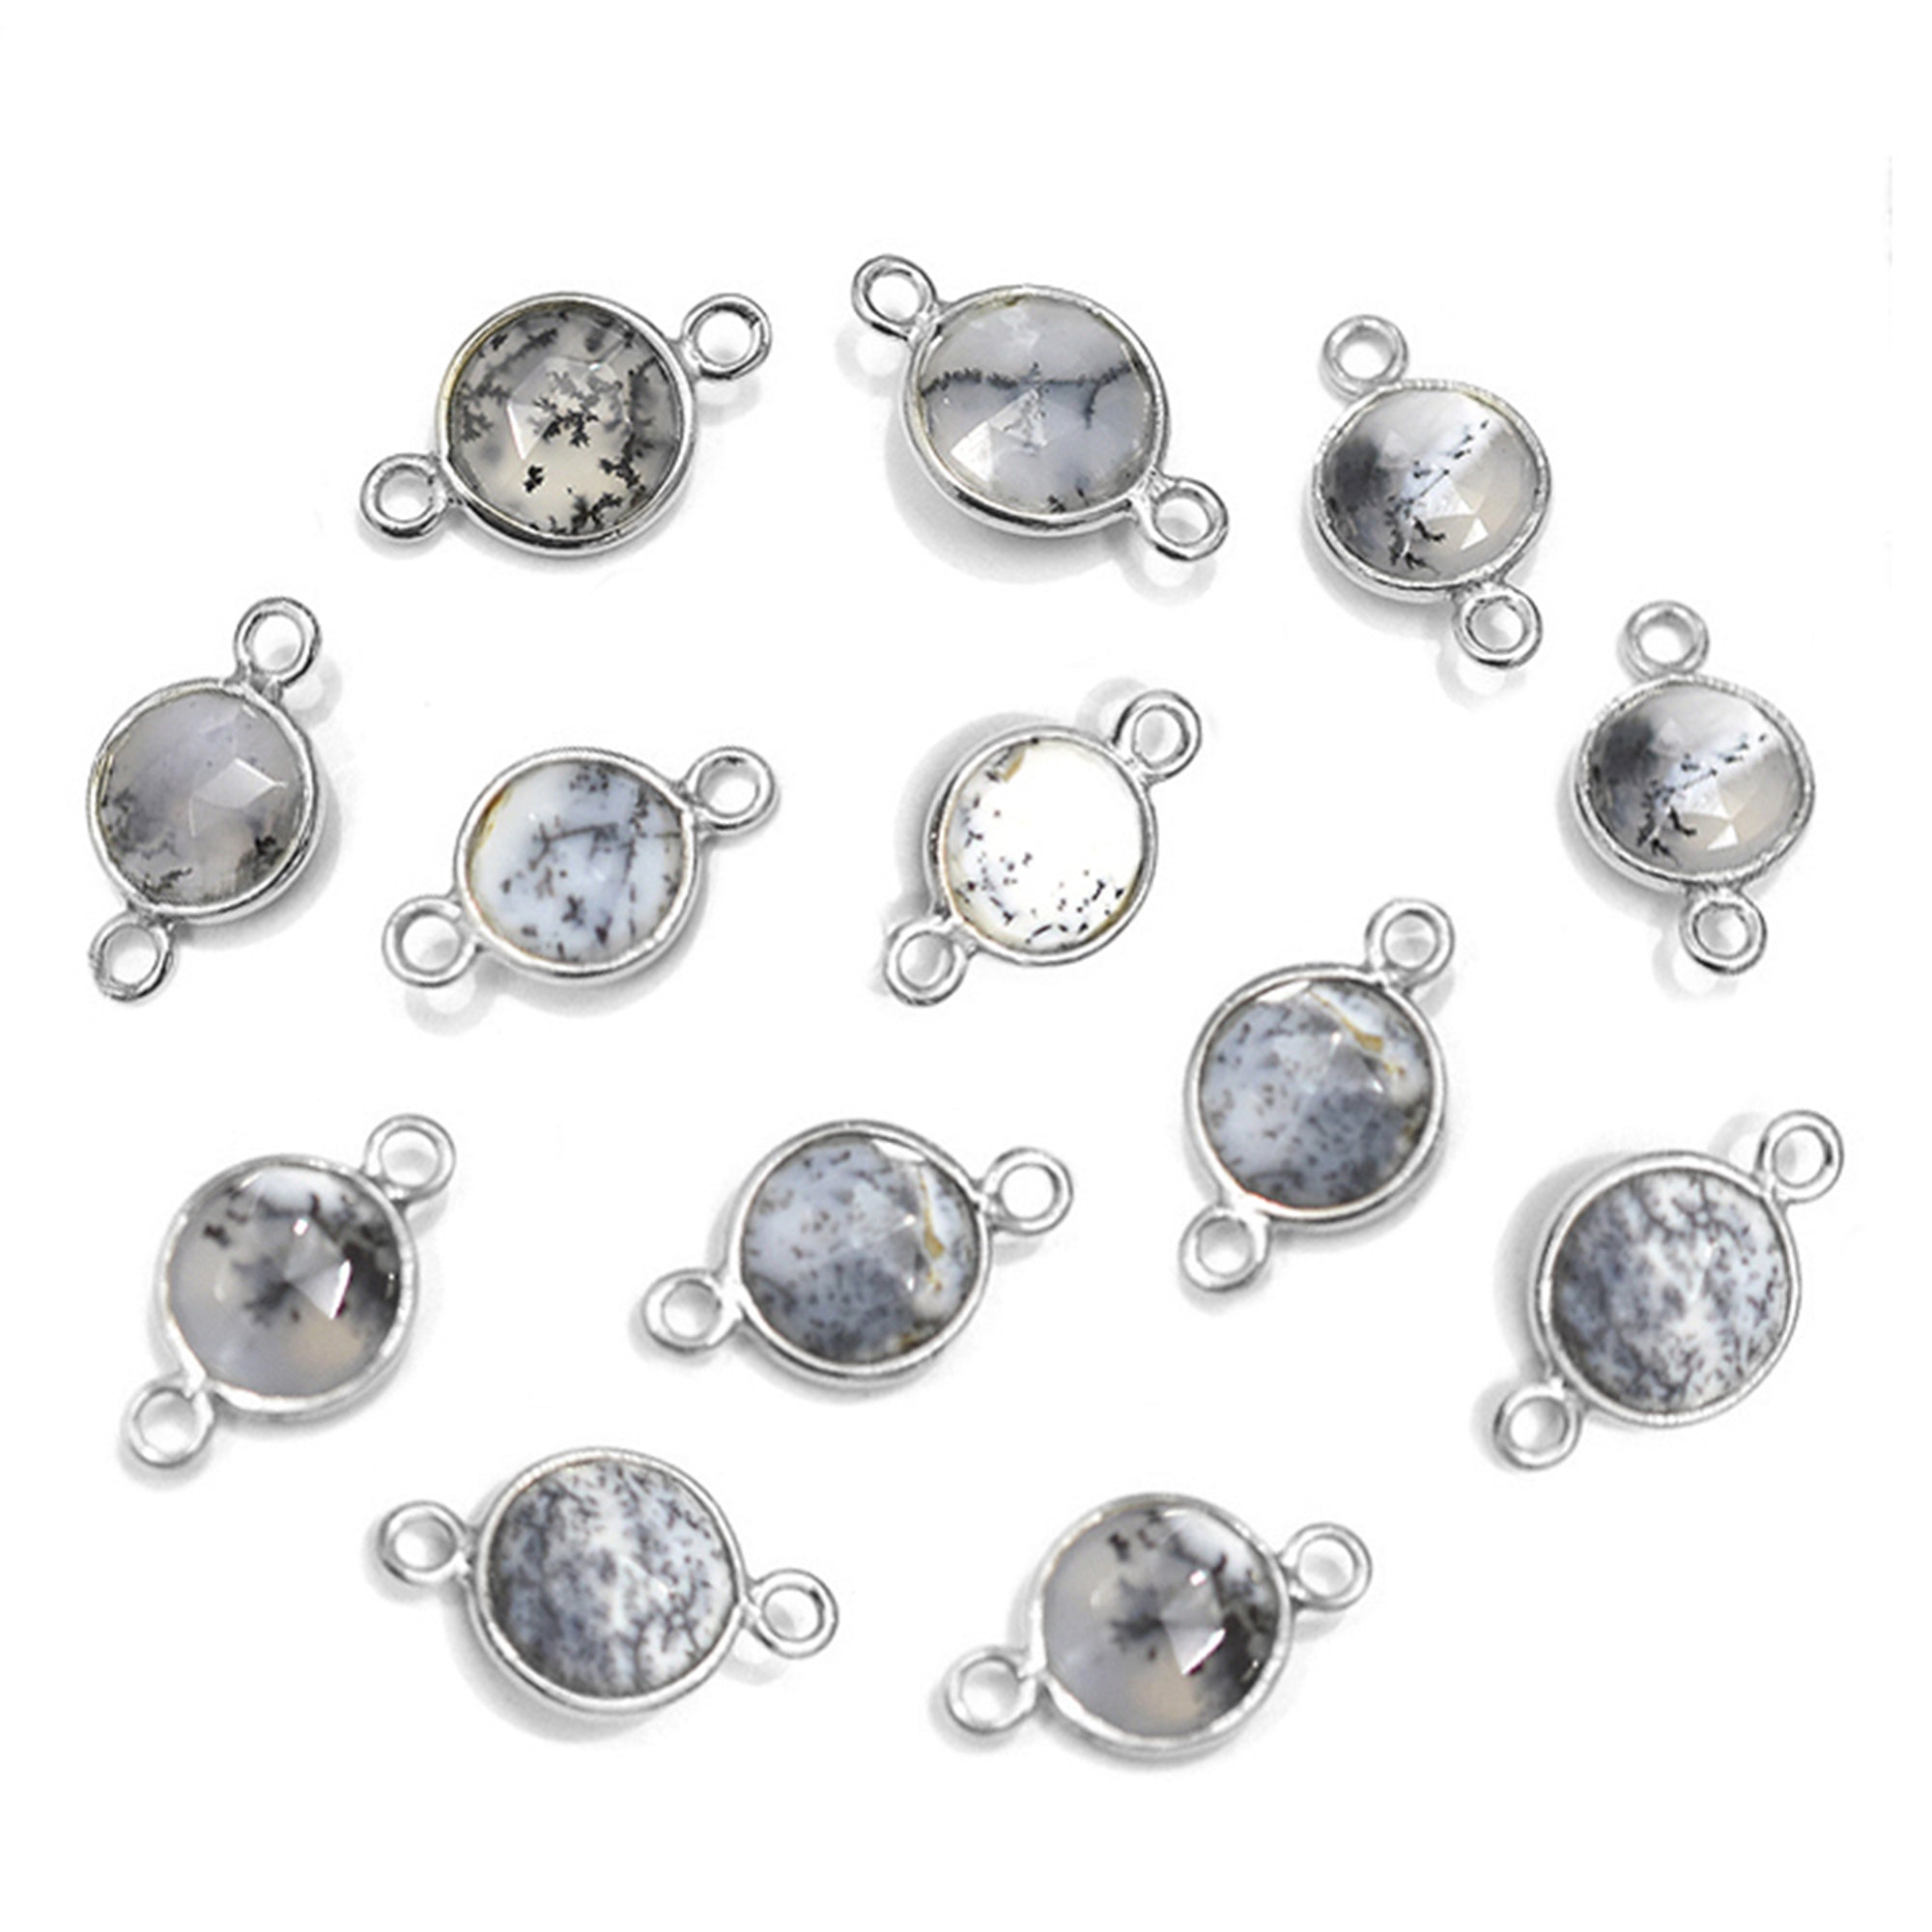 Dendritic Opal 8 MM Round Shape Silver Bezel Rhodium Plated Connector (Set Of 2 Pcs)